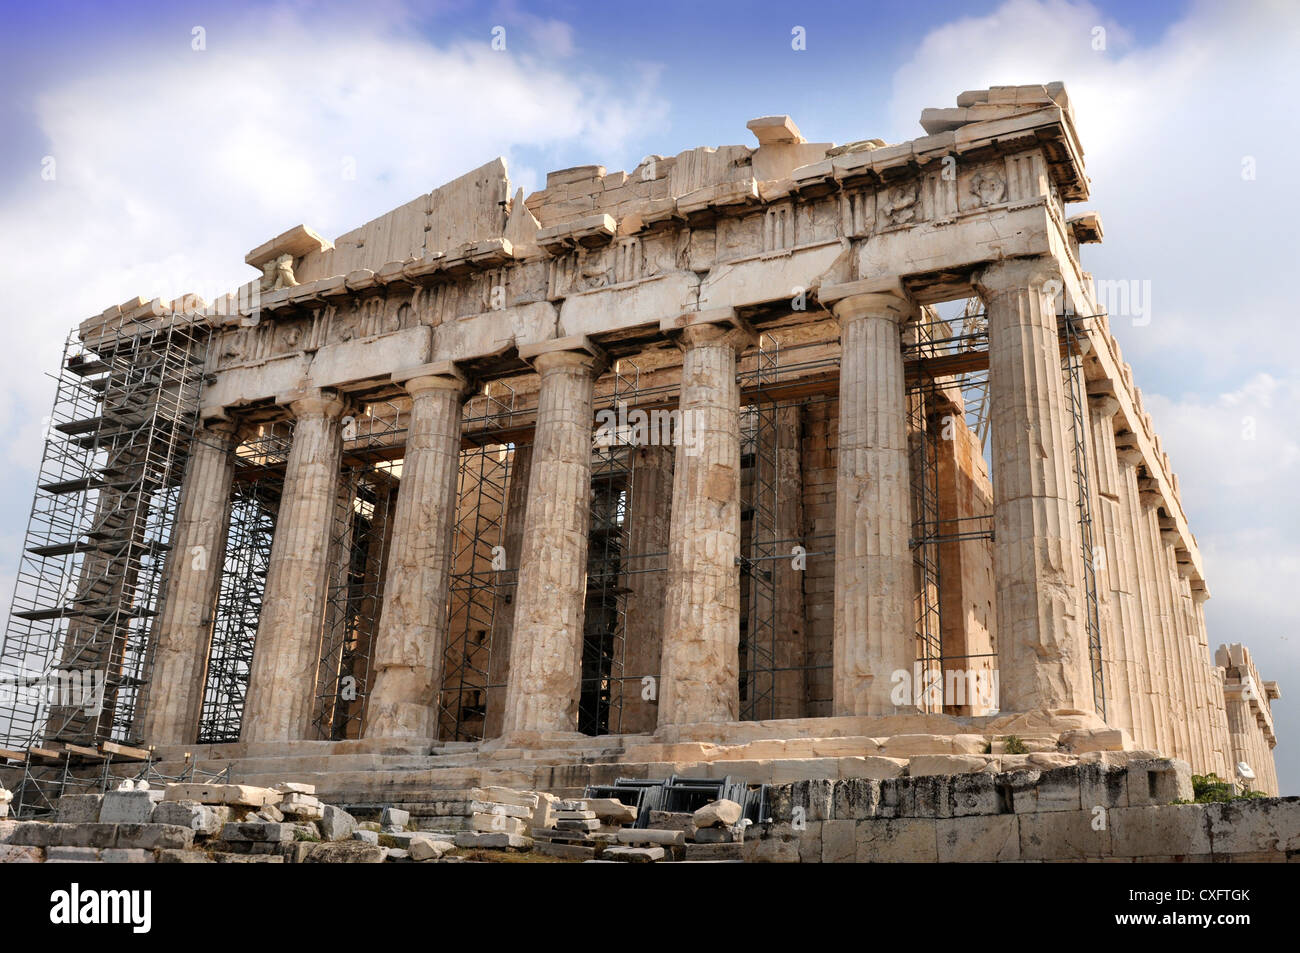 The Parthenon temple undergoing restoration on the Acropolis in Athens, Greece Stock Photo